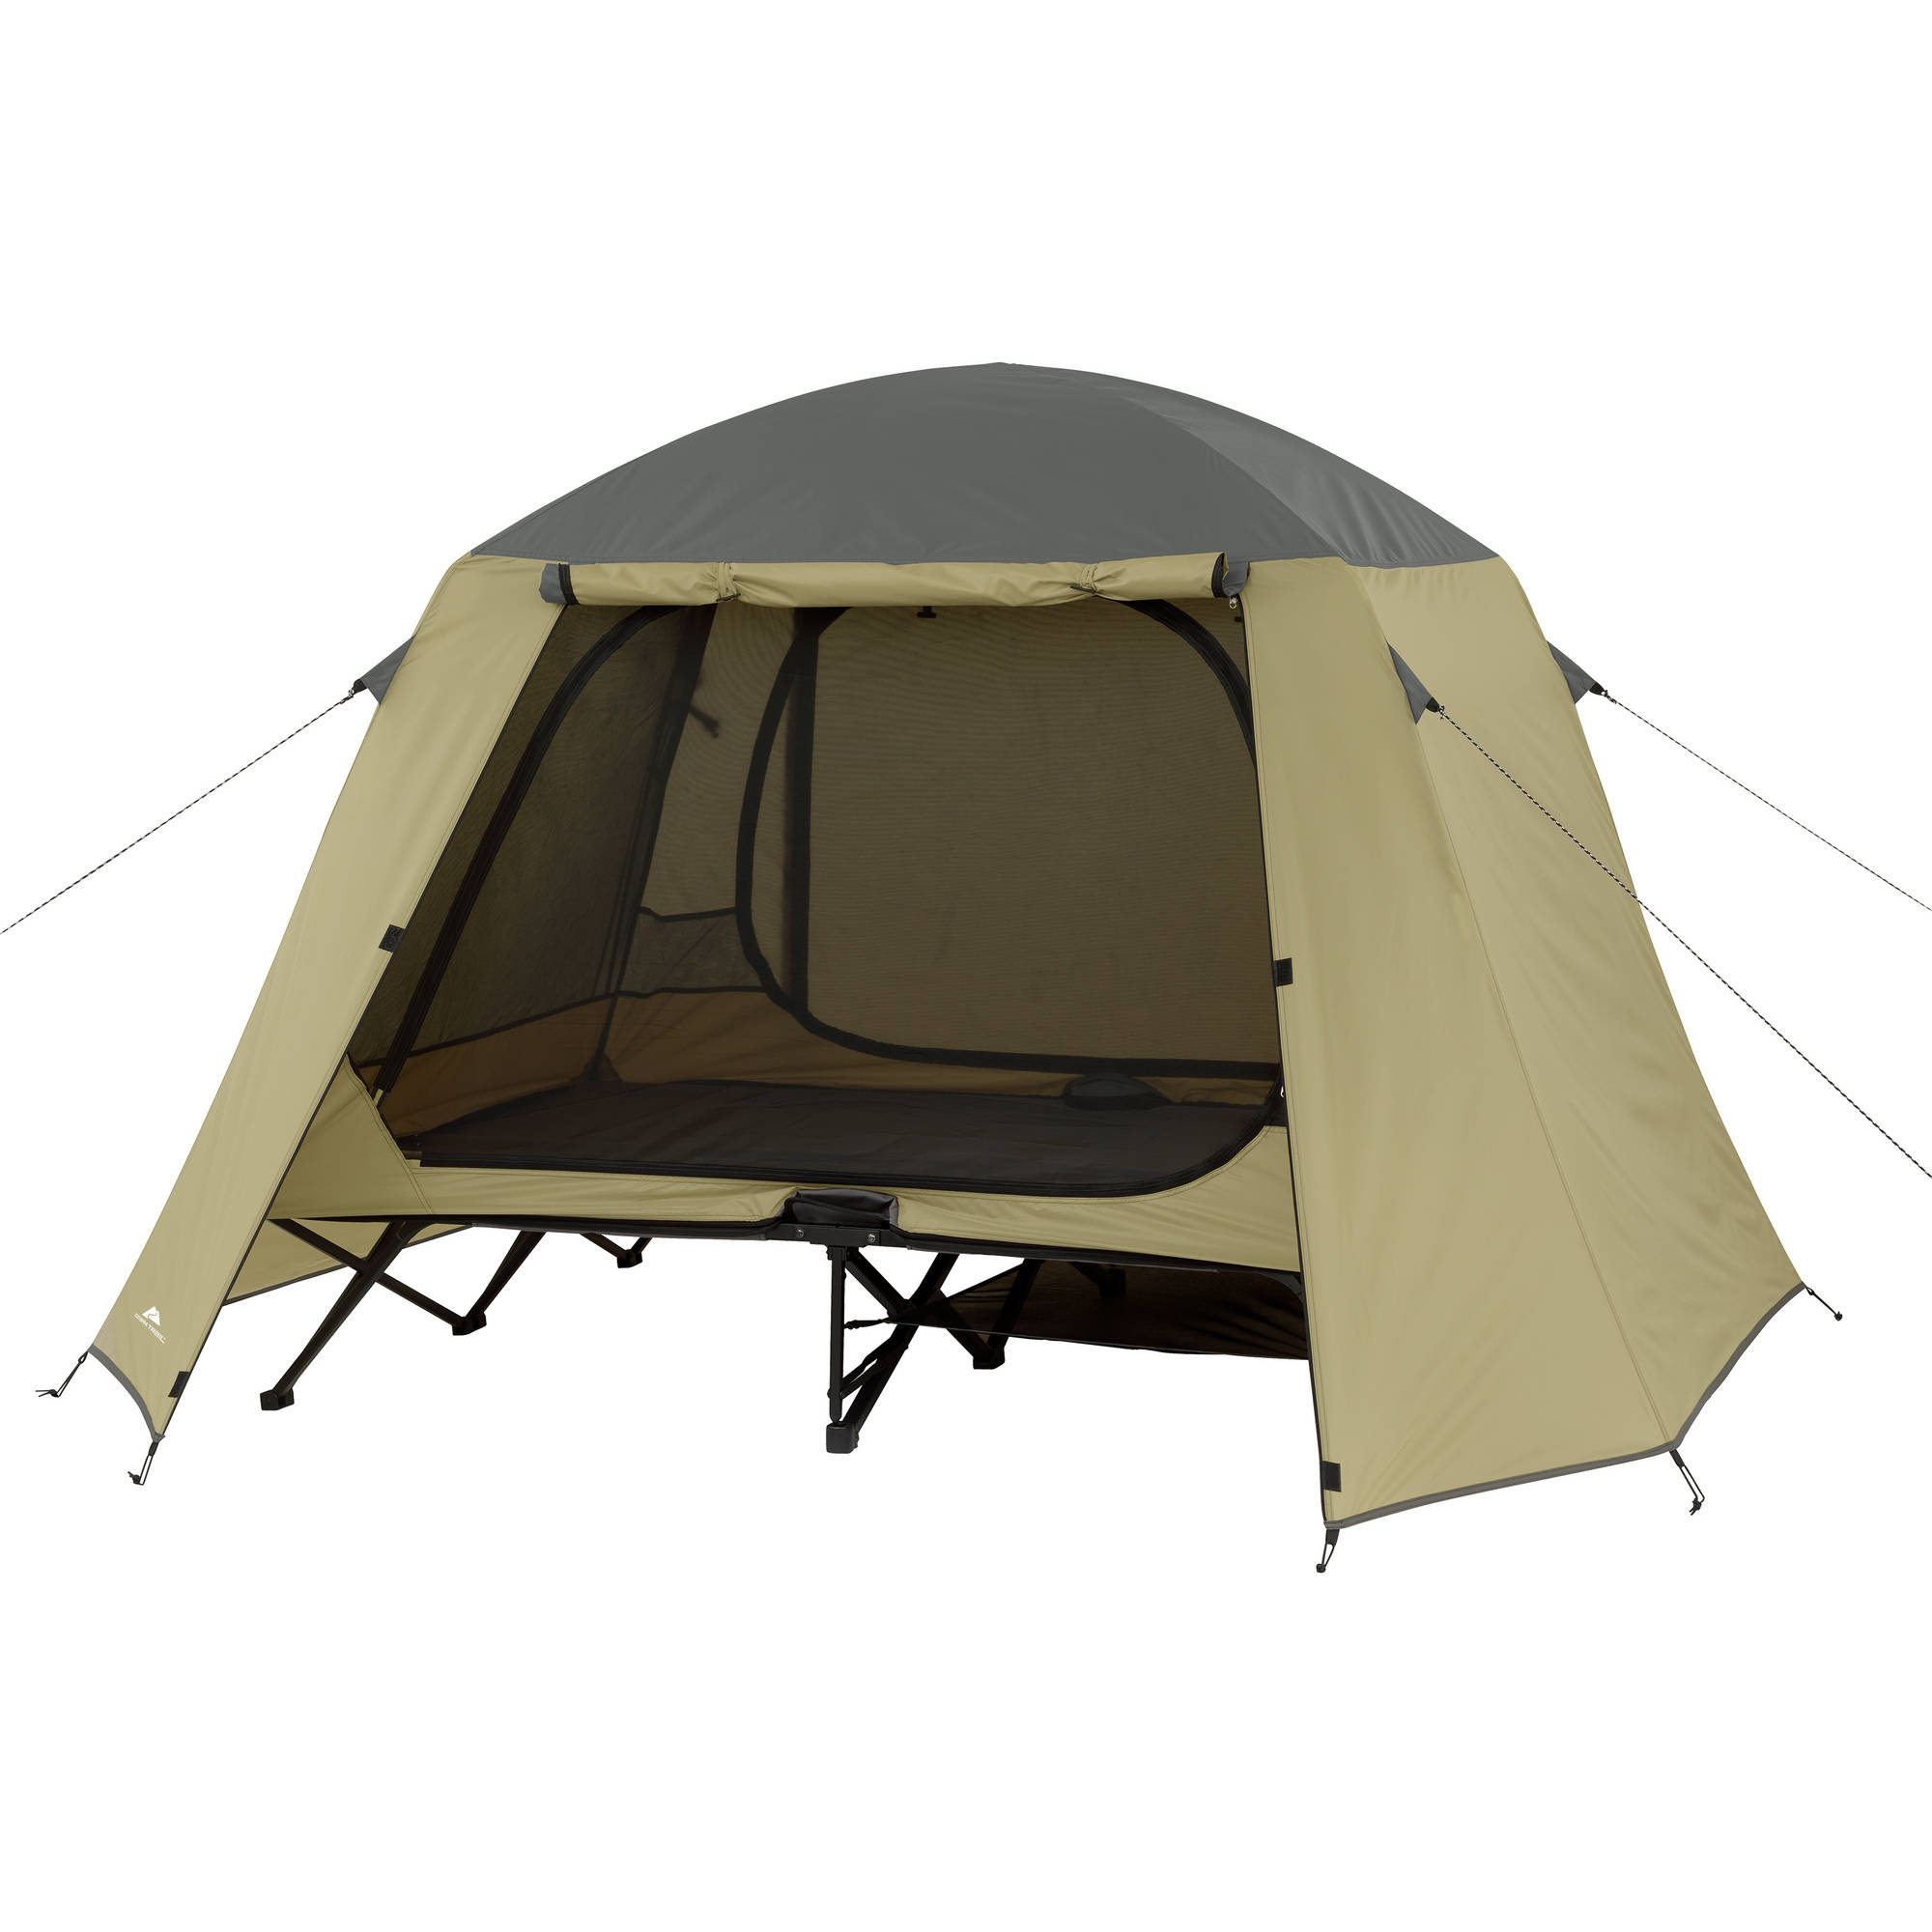 Ozark Trail Two-Person Cot Tent - image 2 of 7